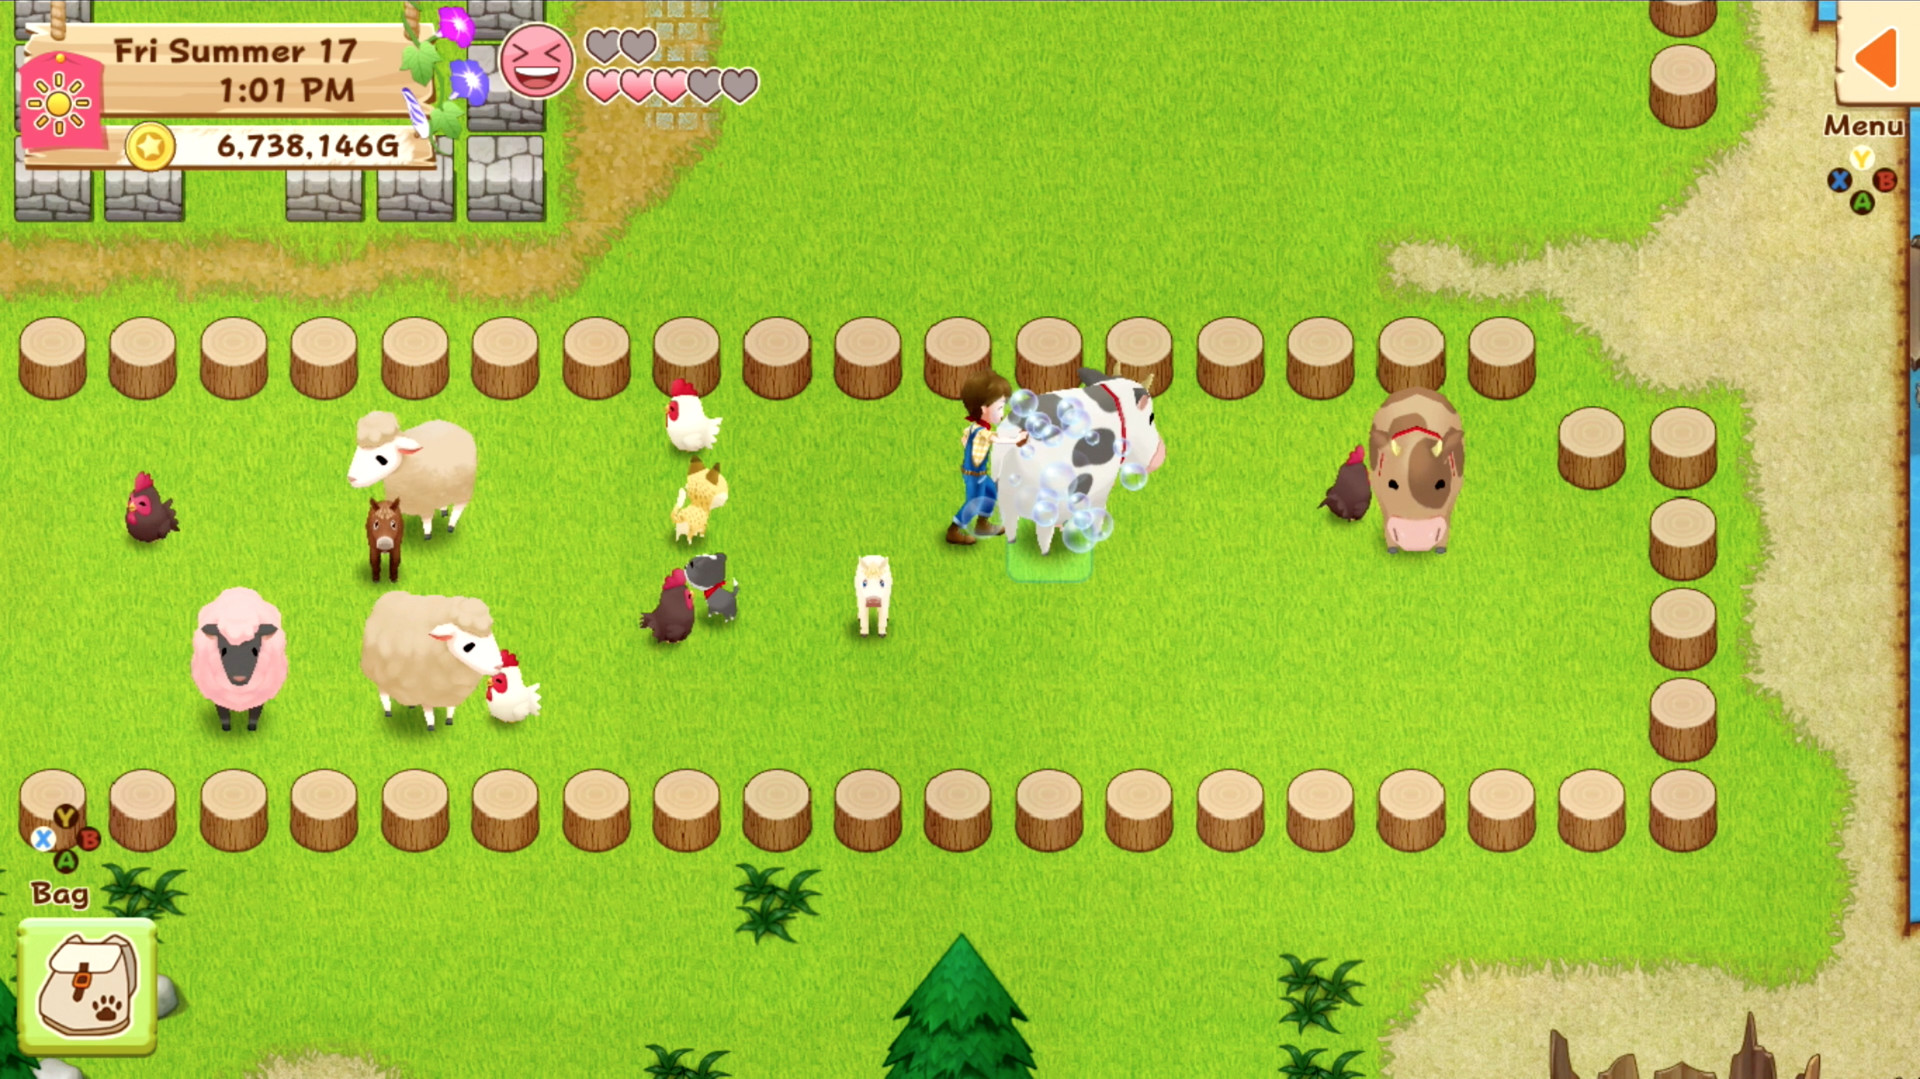 Harvest Moon: Light of Hope Special Edition on Steam